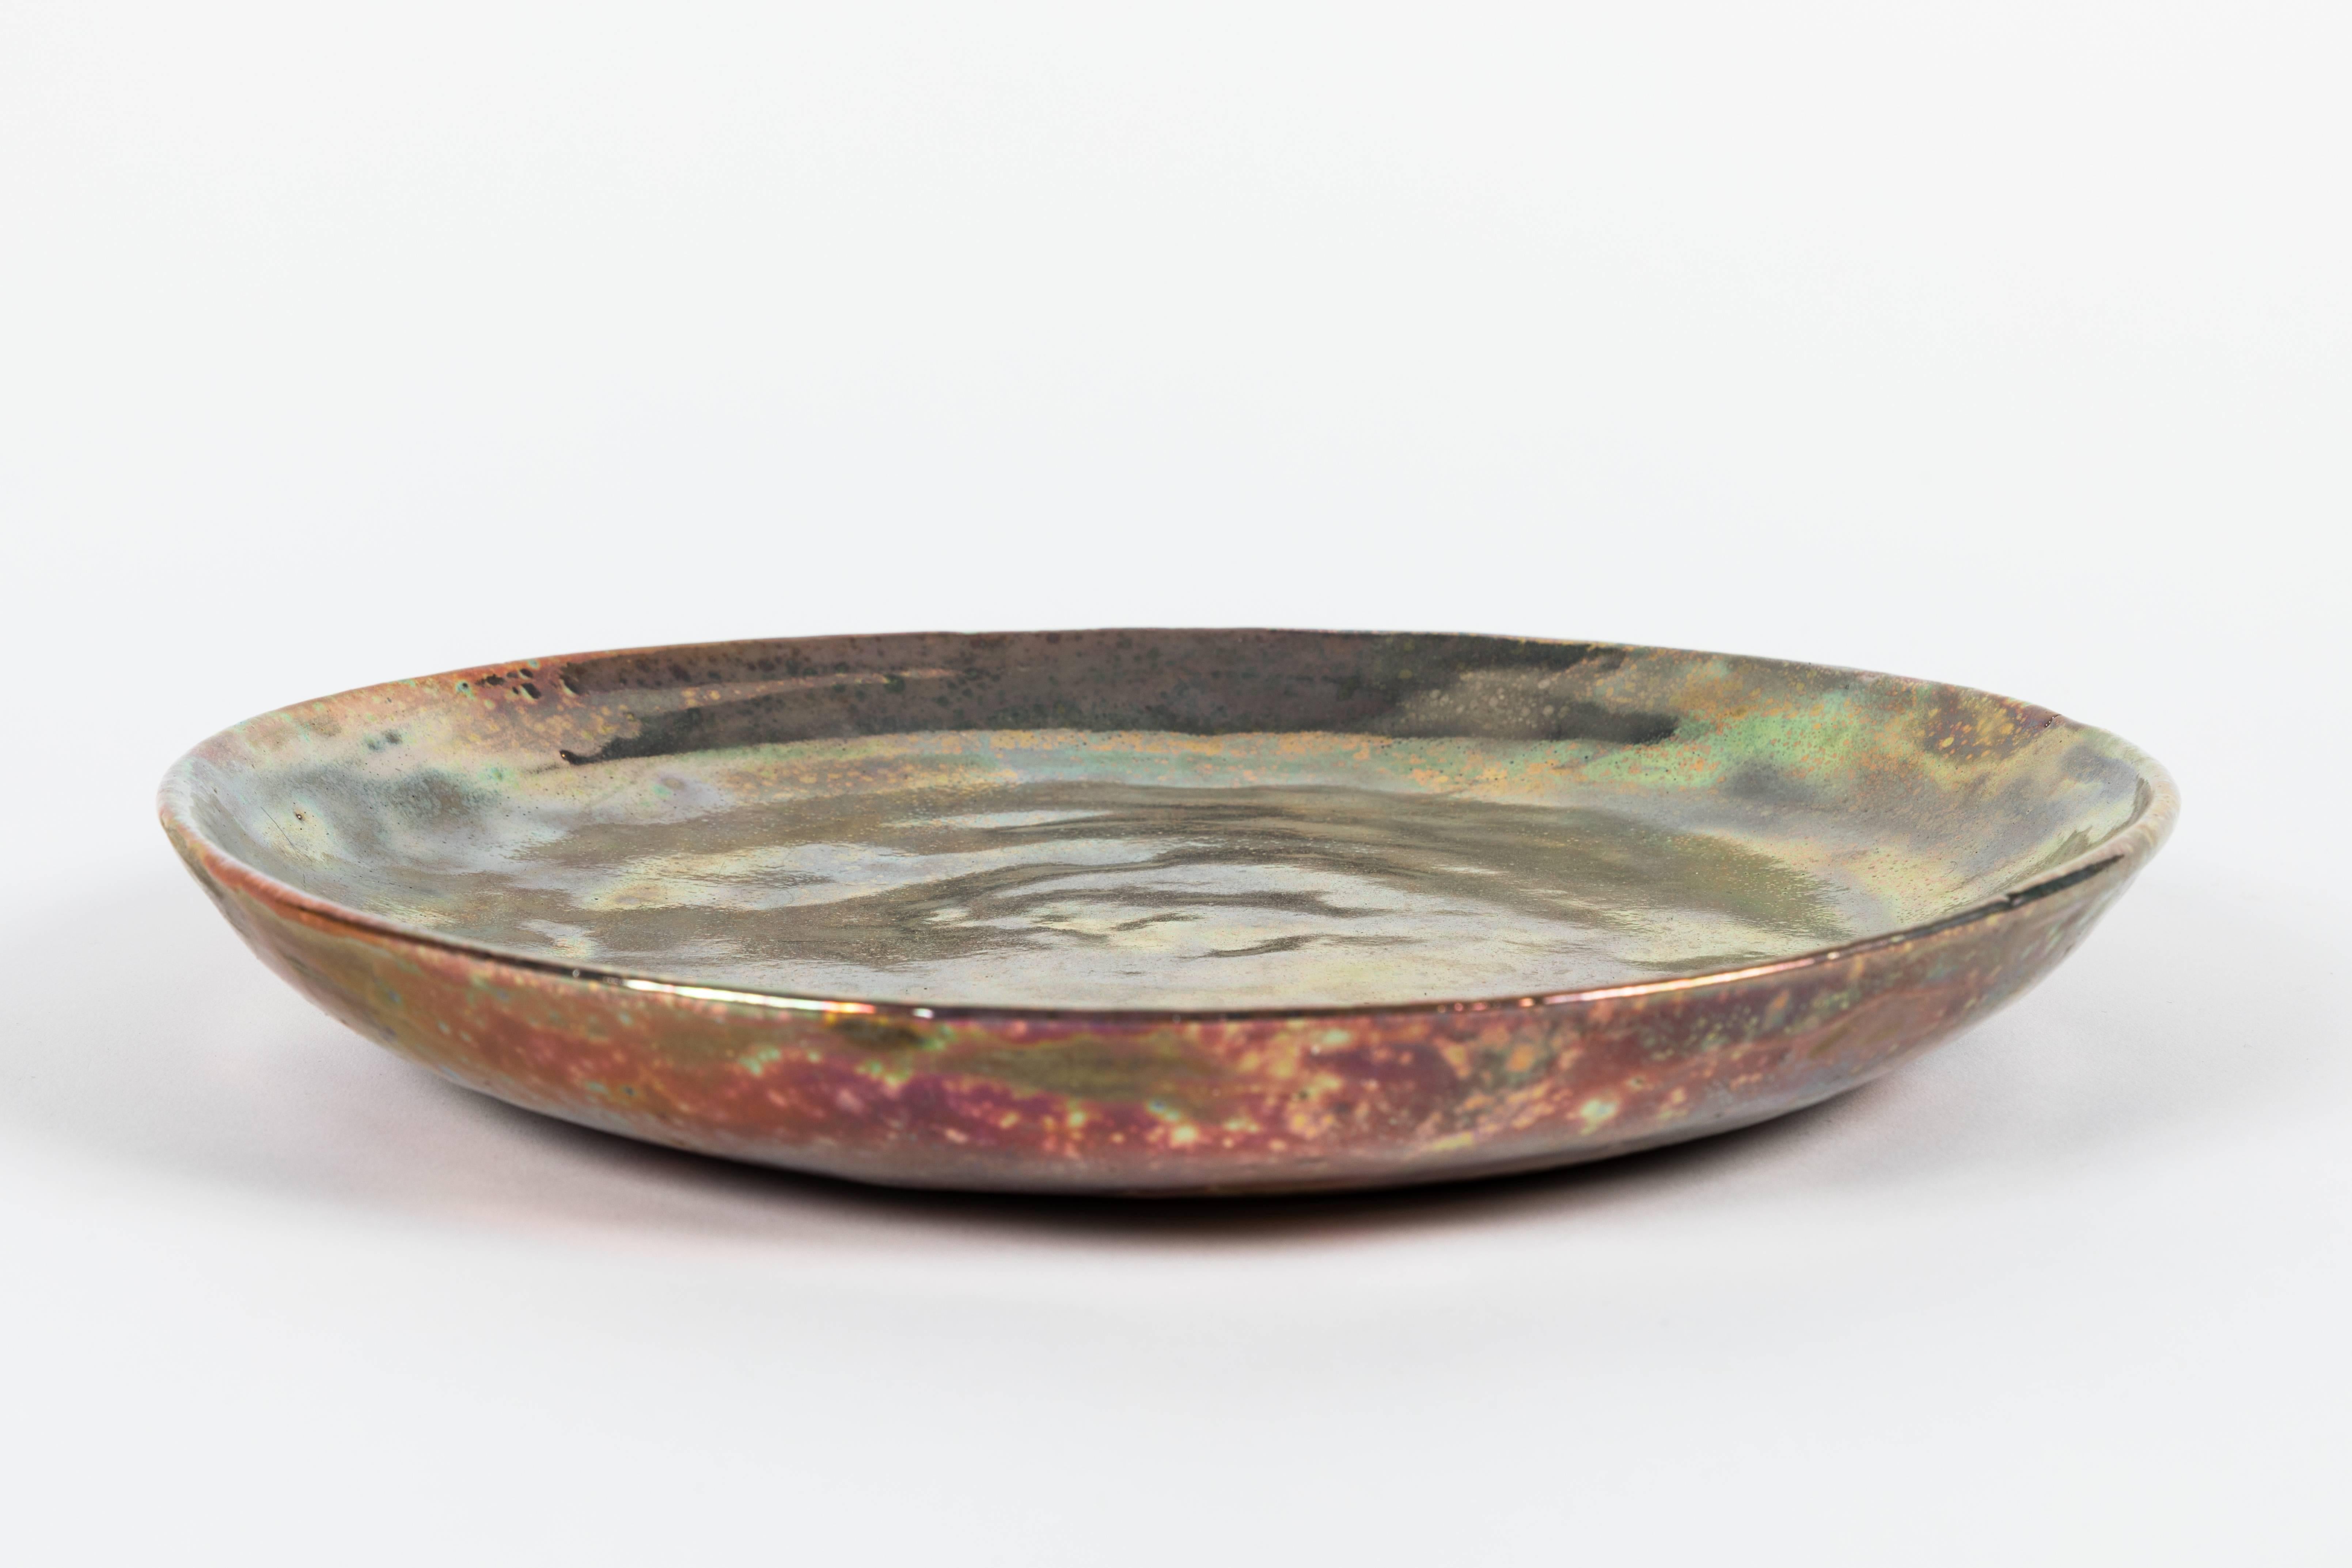 Ceramic earthenware charger by Ojai, California ceramicist Beatrice Wood (1893-1998), in her signature iridescent glaze. Signed 